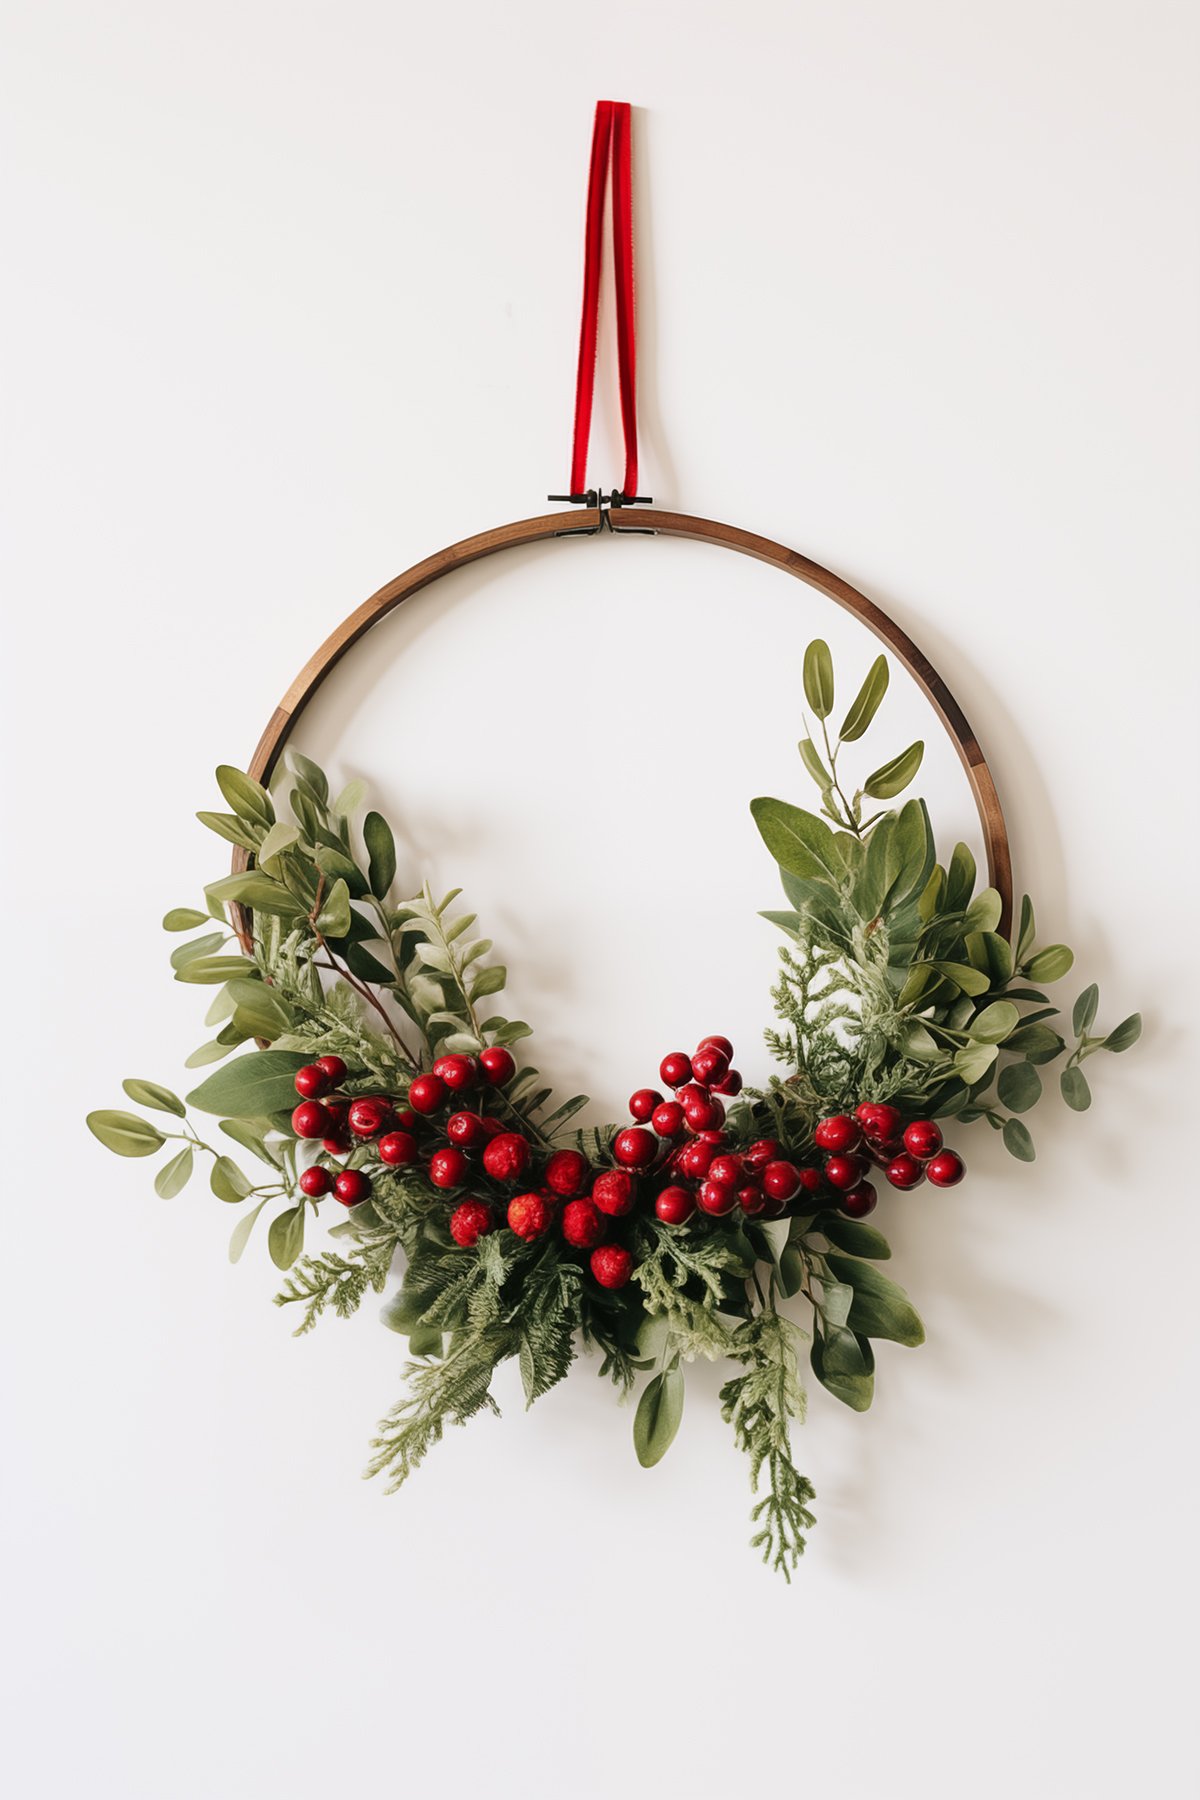 DIY Christmas wreath made from an embroidery hoop with faux greenery and red berries.